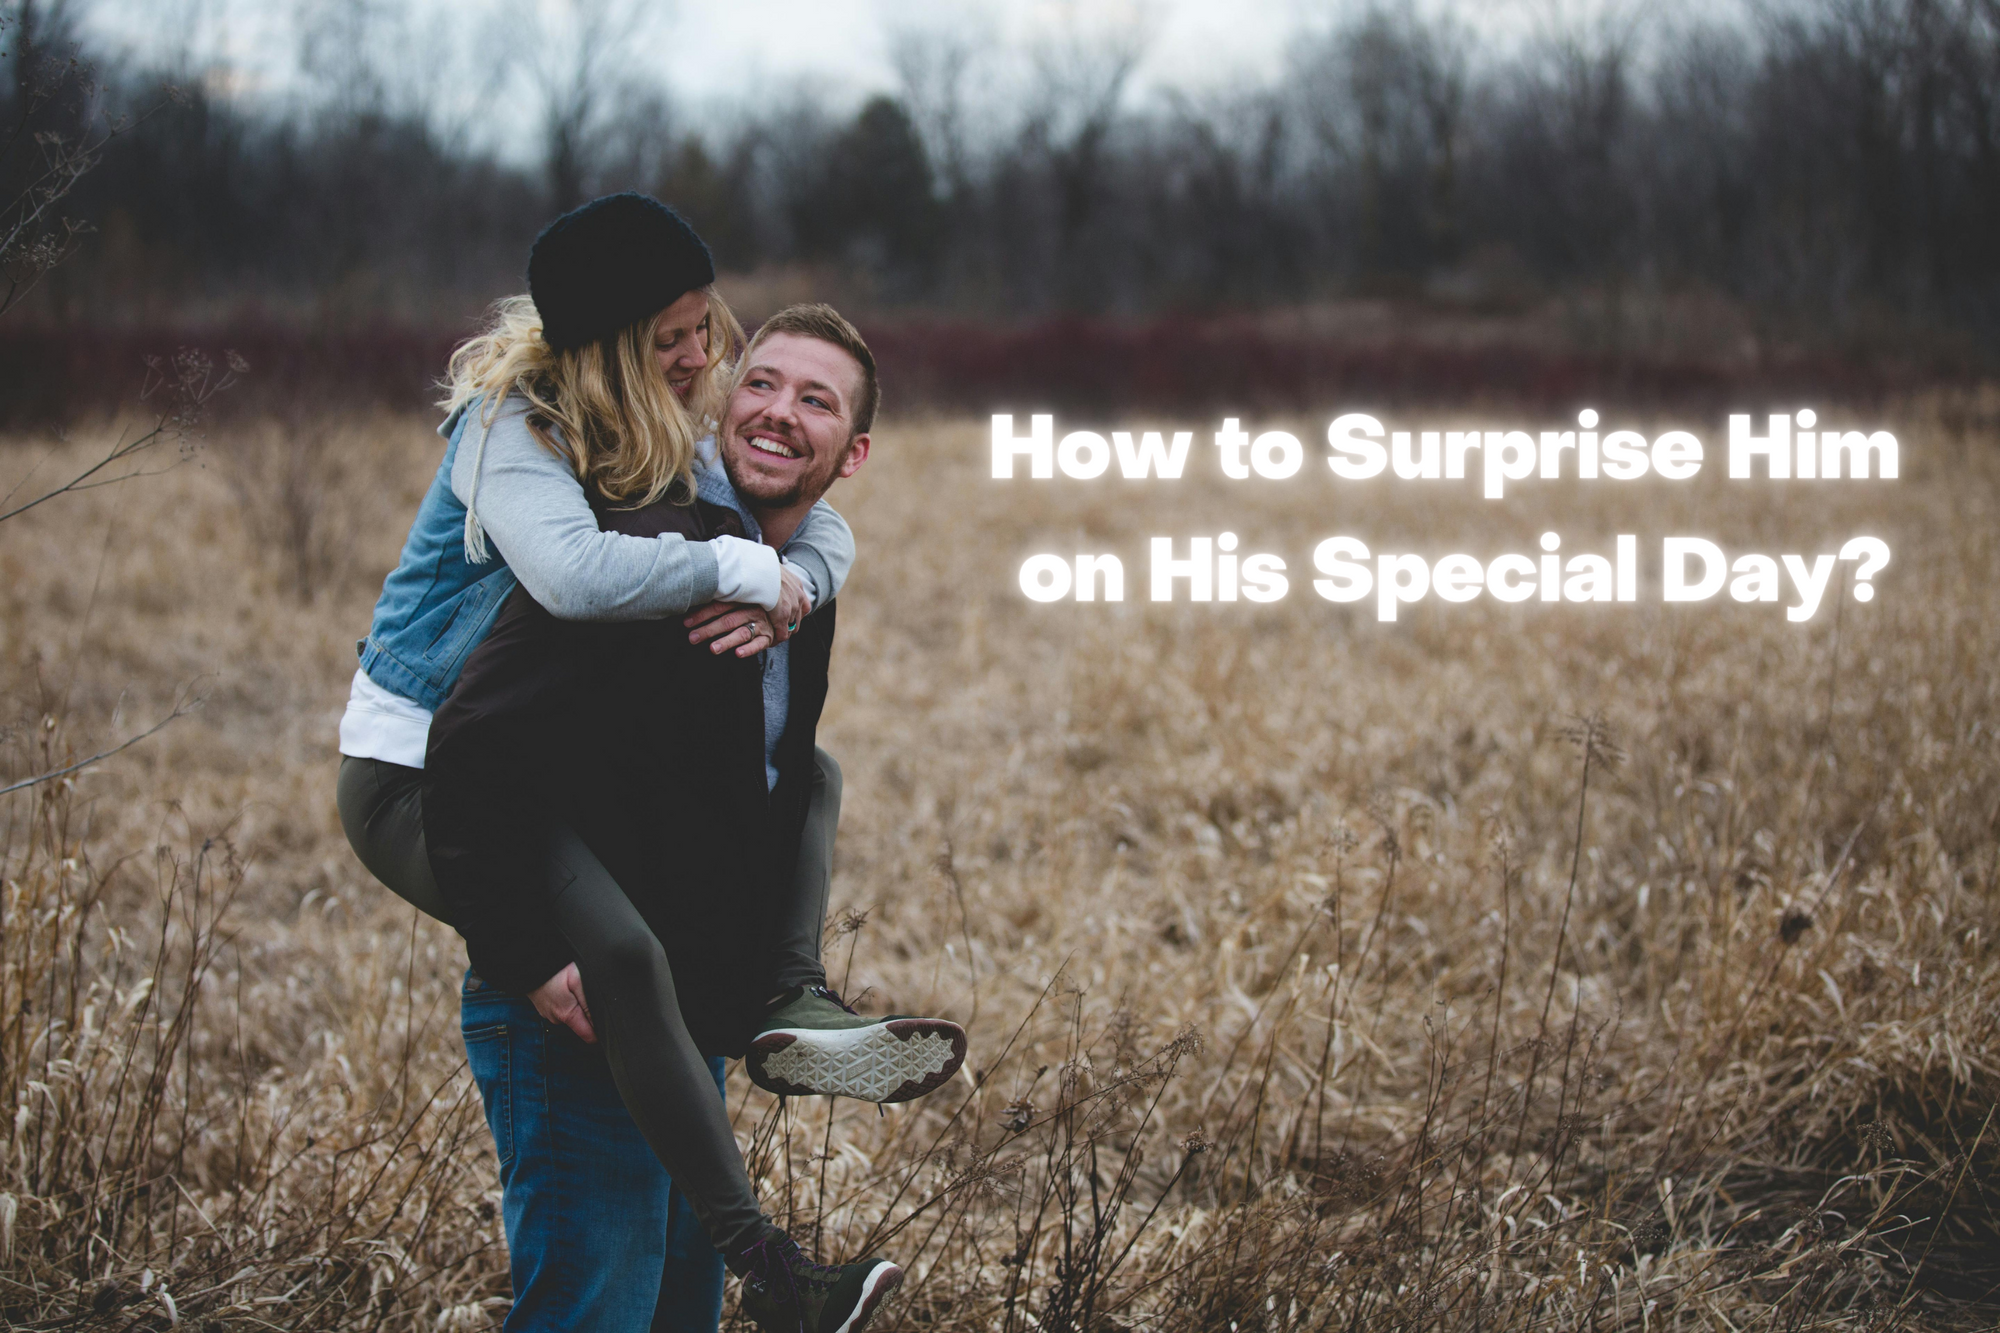 How to Surprise Him on His Special Day?